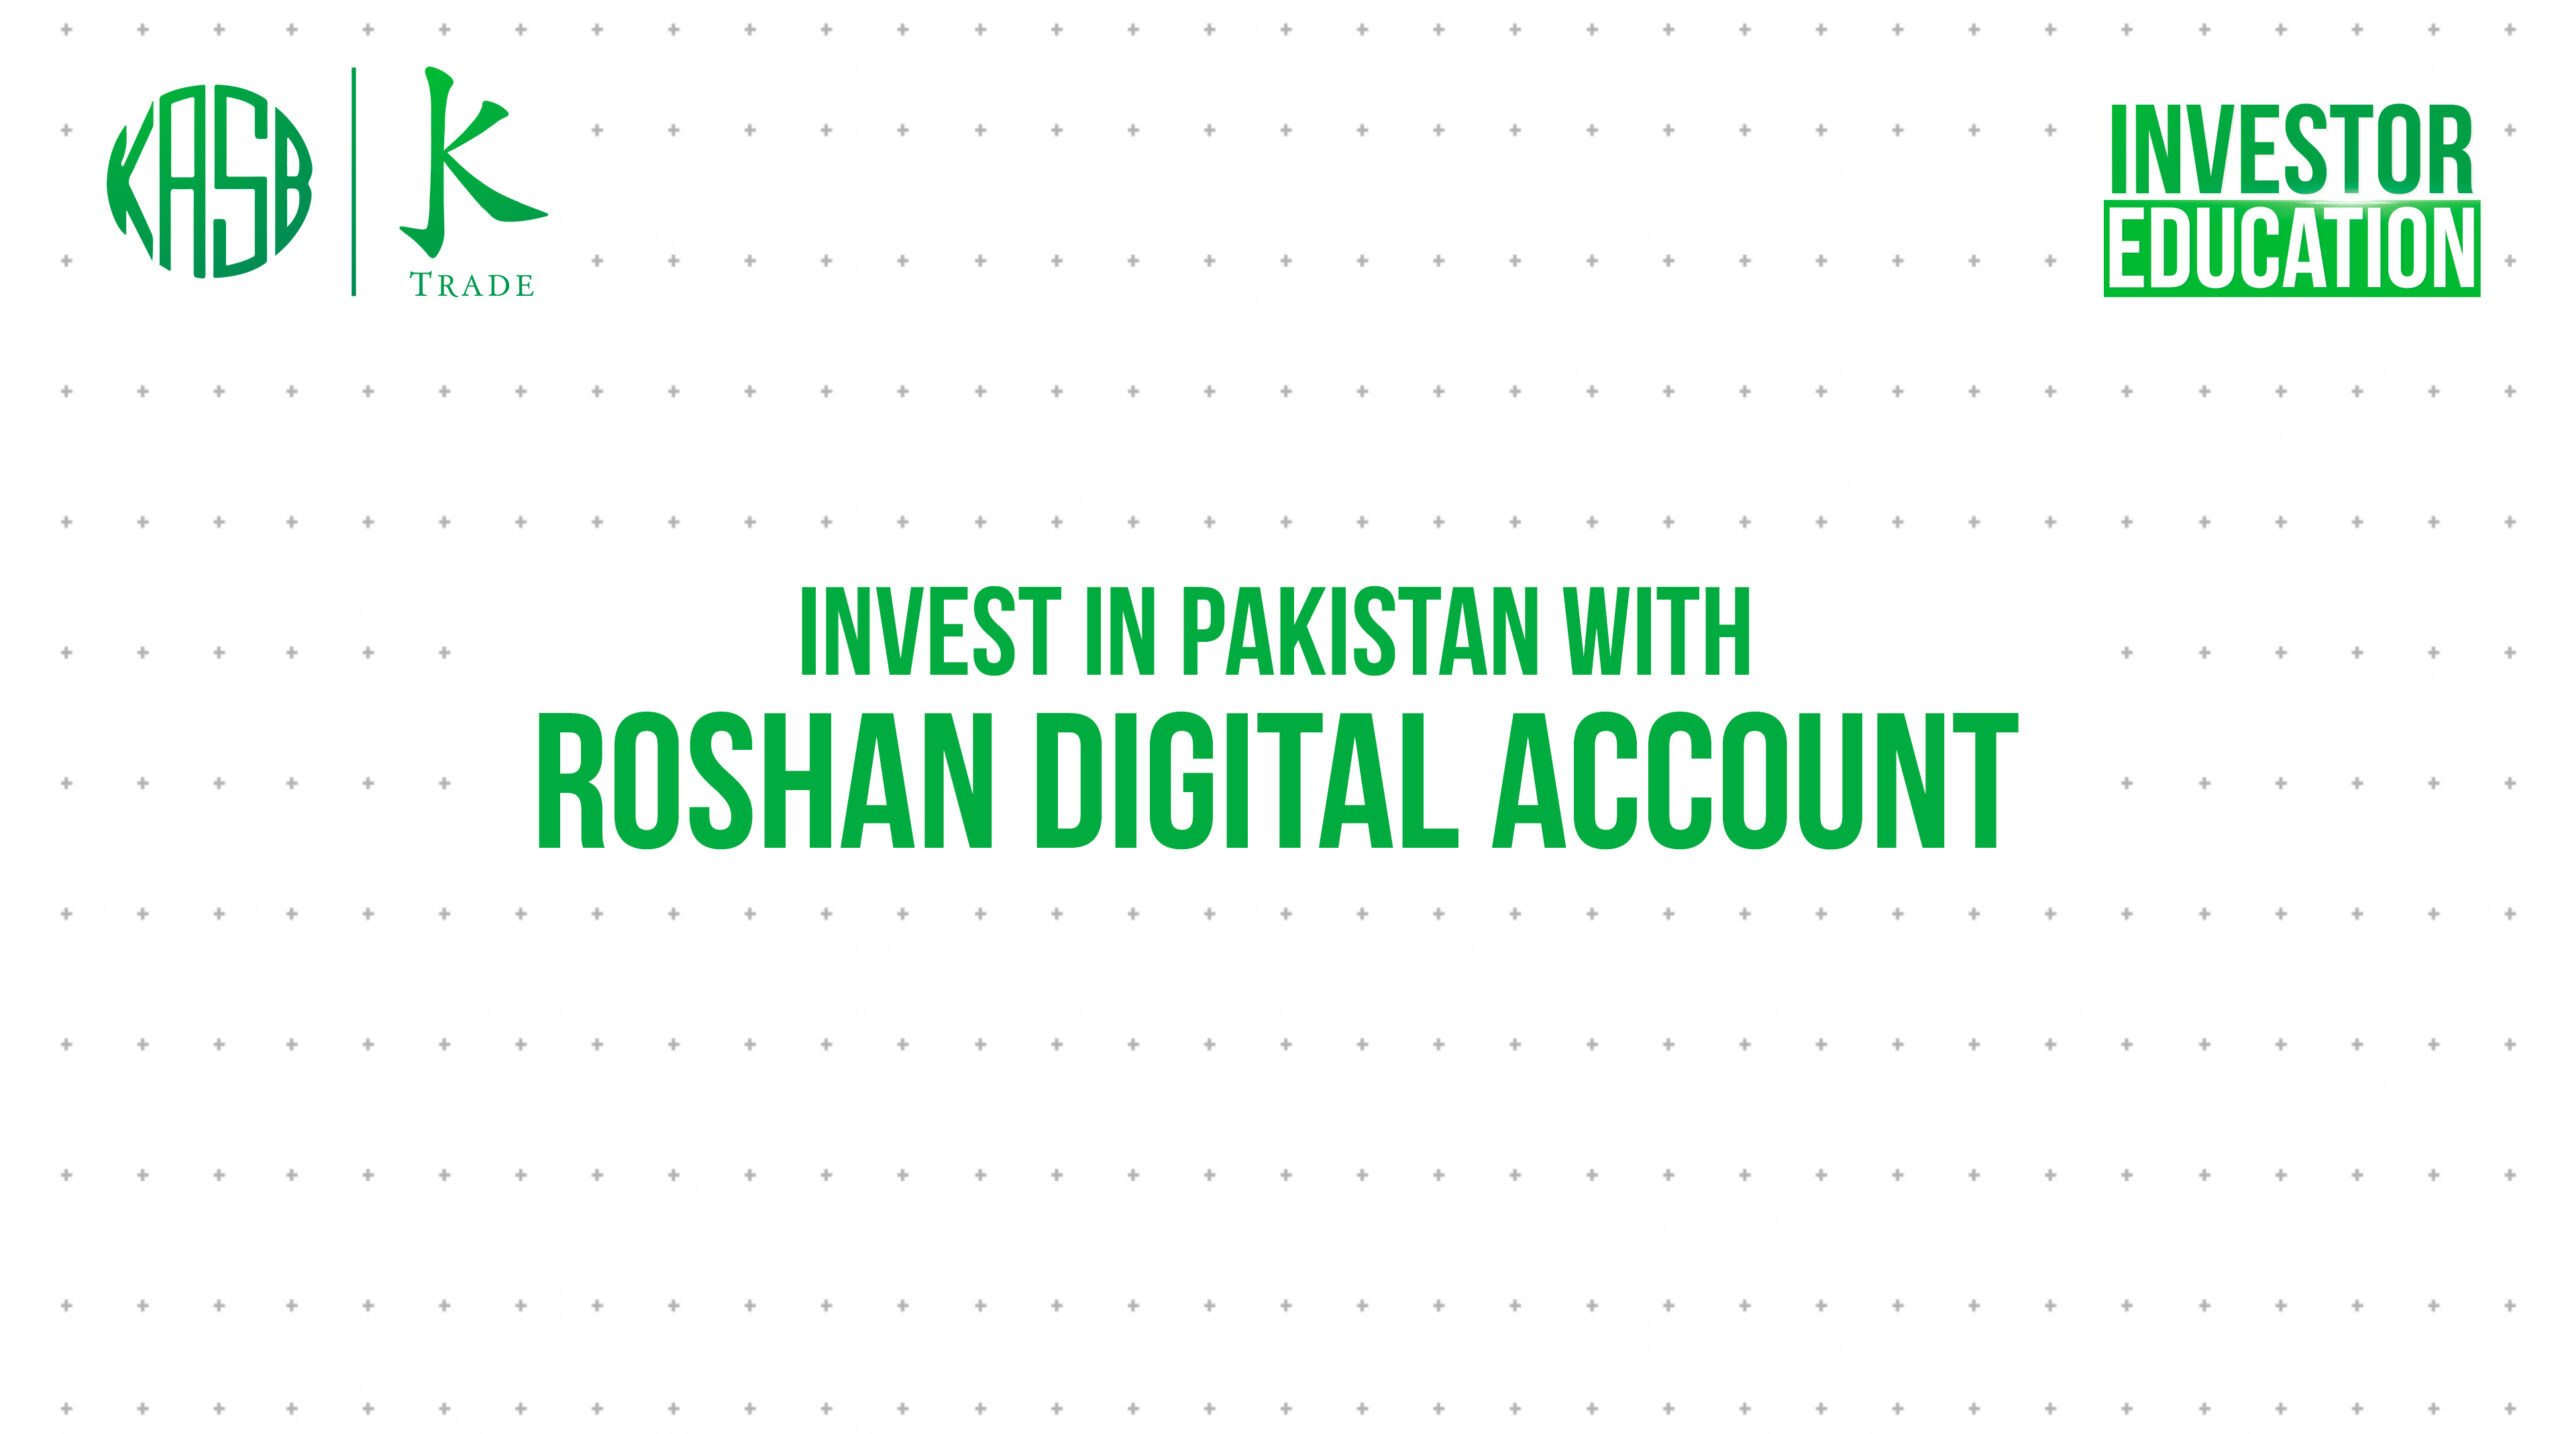 Invest in Pakistan with Roshan Digital Account scaled